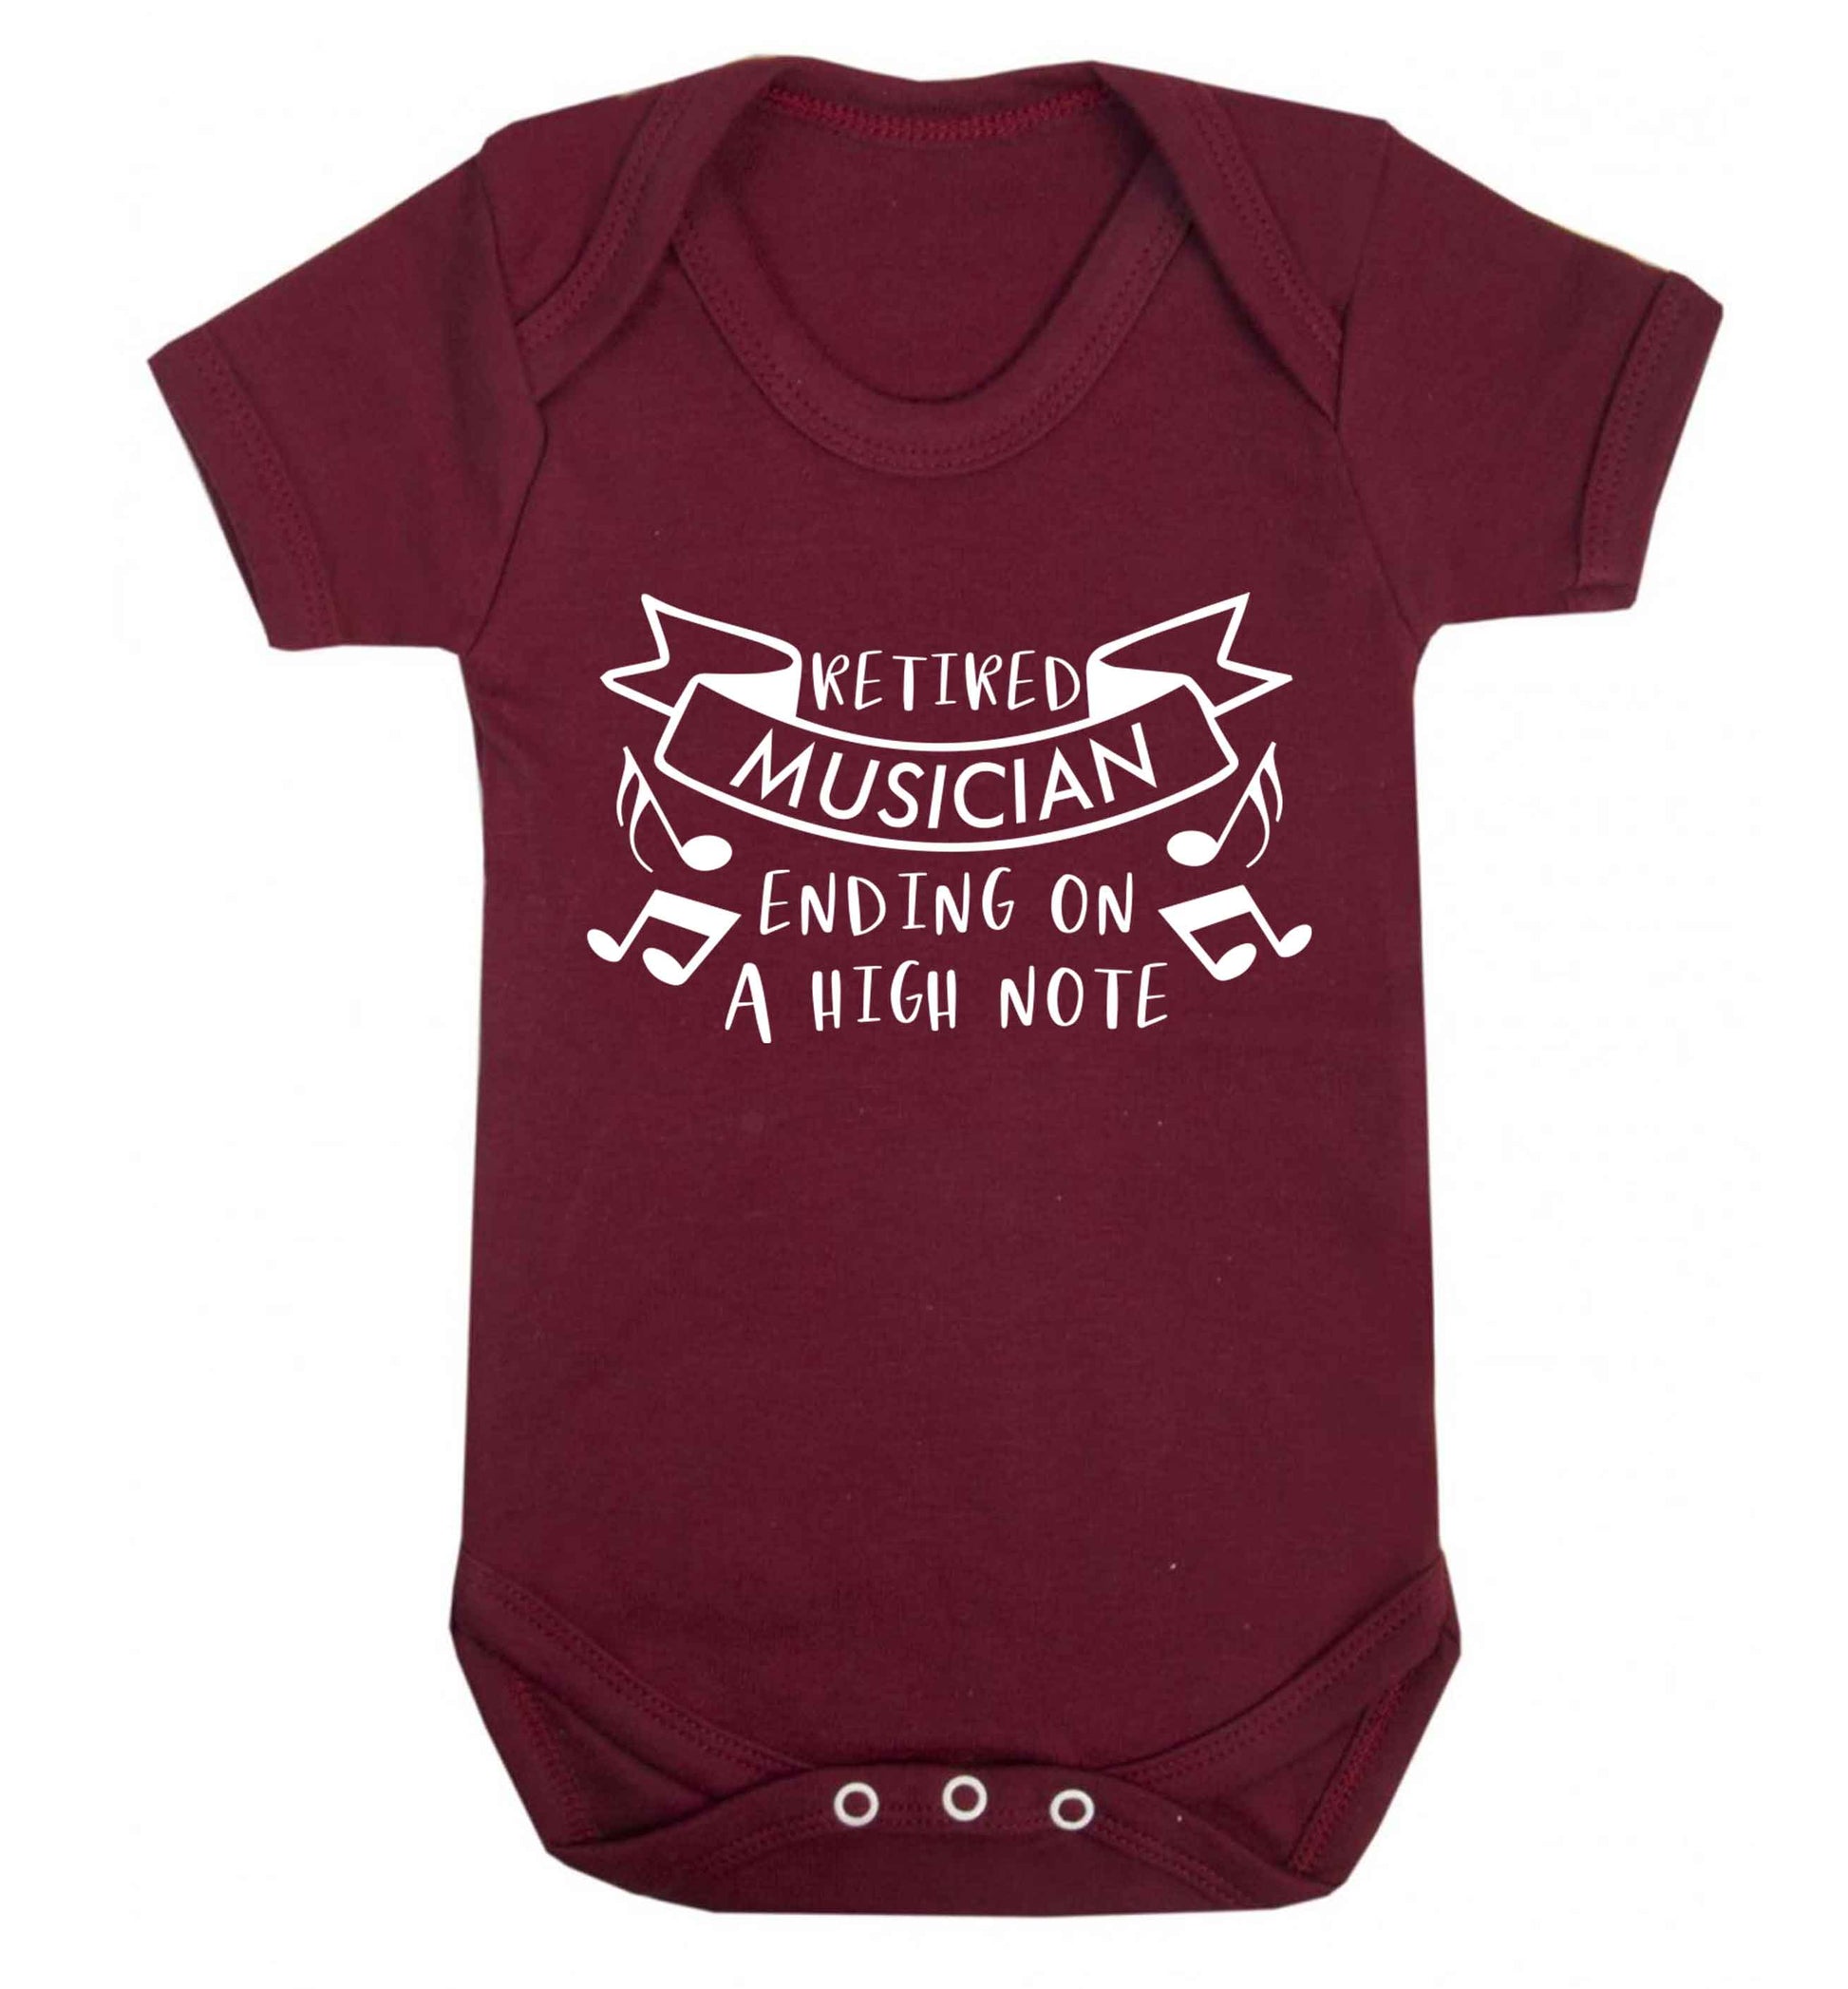 Retired musician ending on a high note Baby Vest maroon 18-24 months